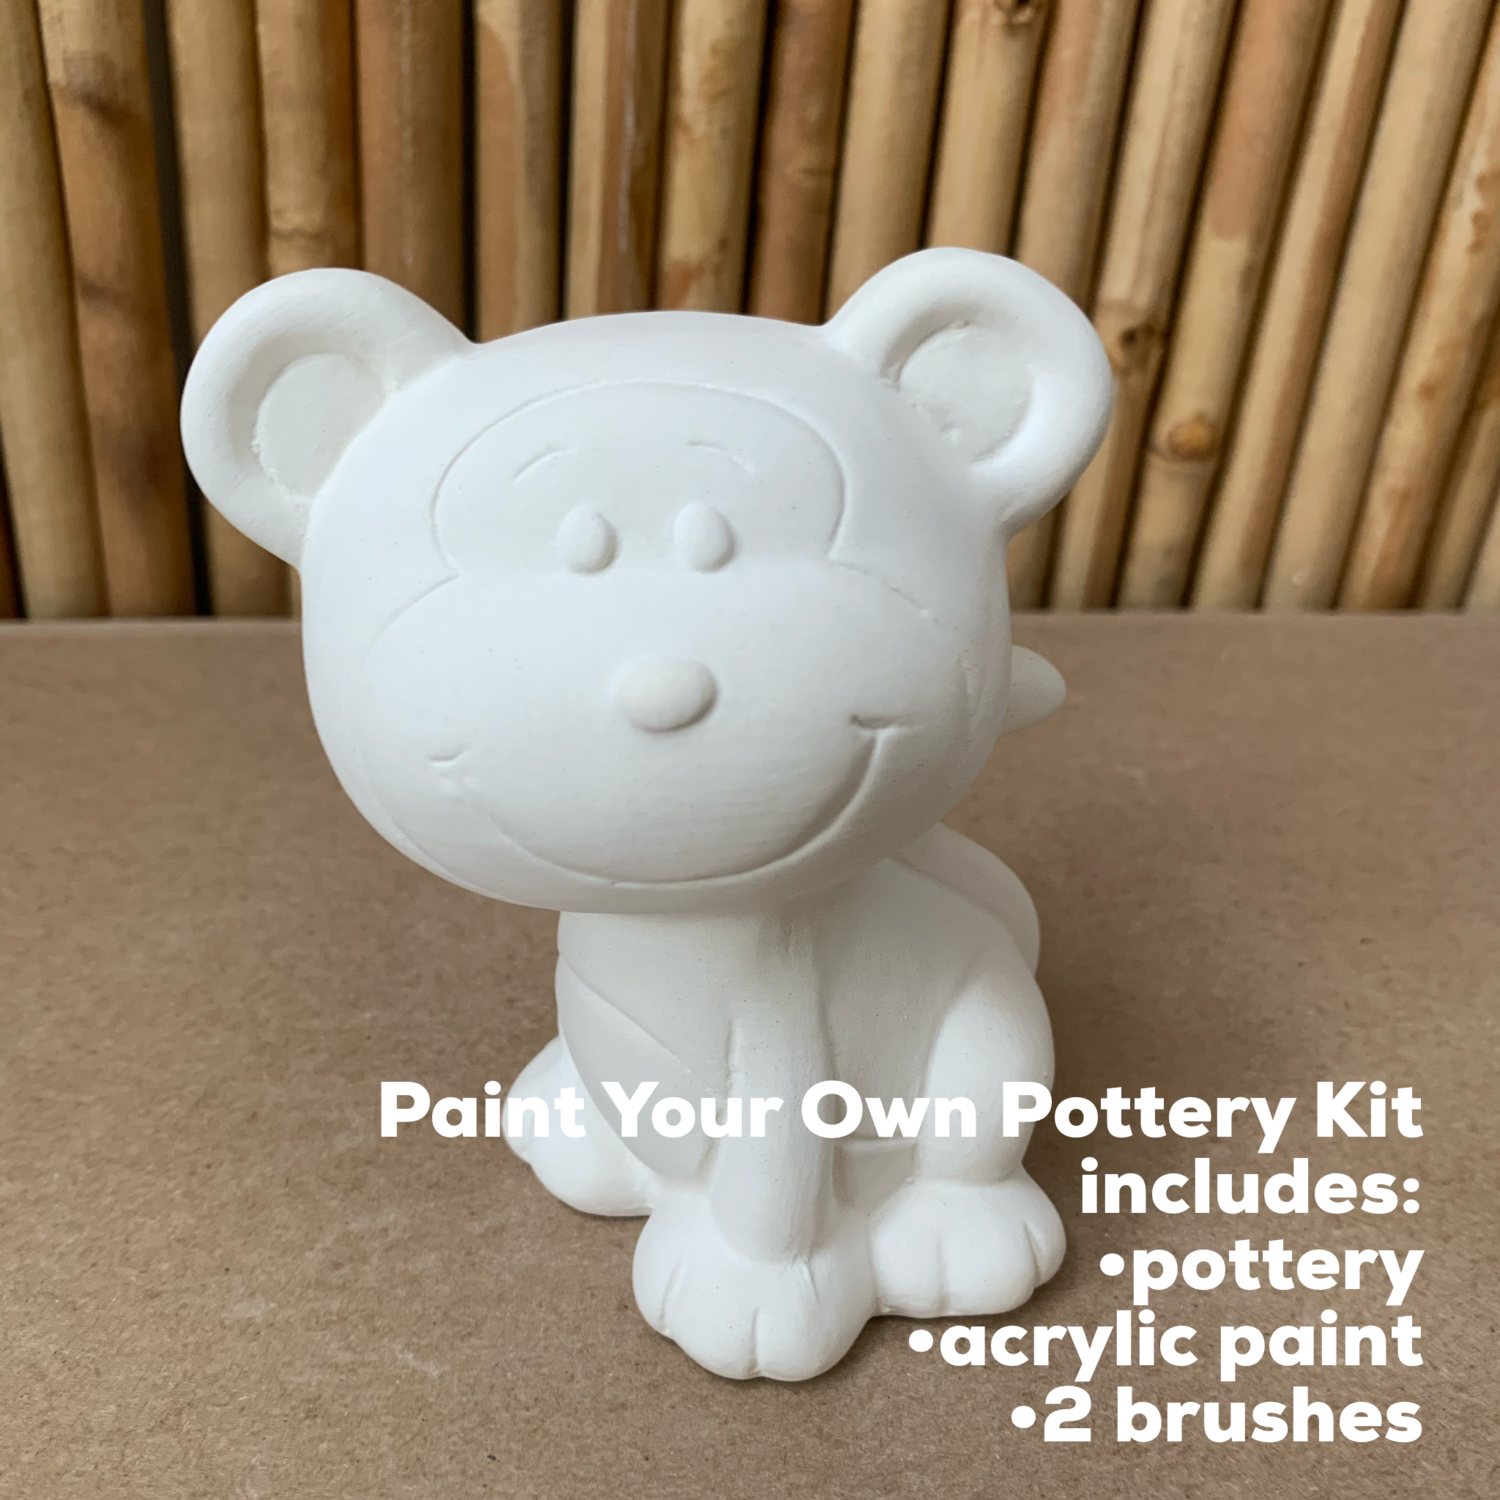 NO FIRE Paint Your Own Pottery Kit - 
Ceramic Monkey Figurine Acrylic Painting Kit